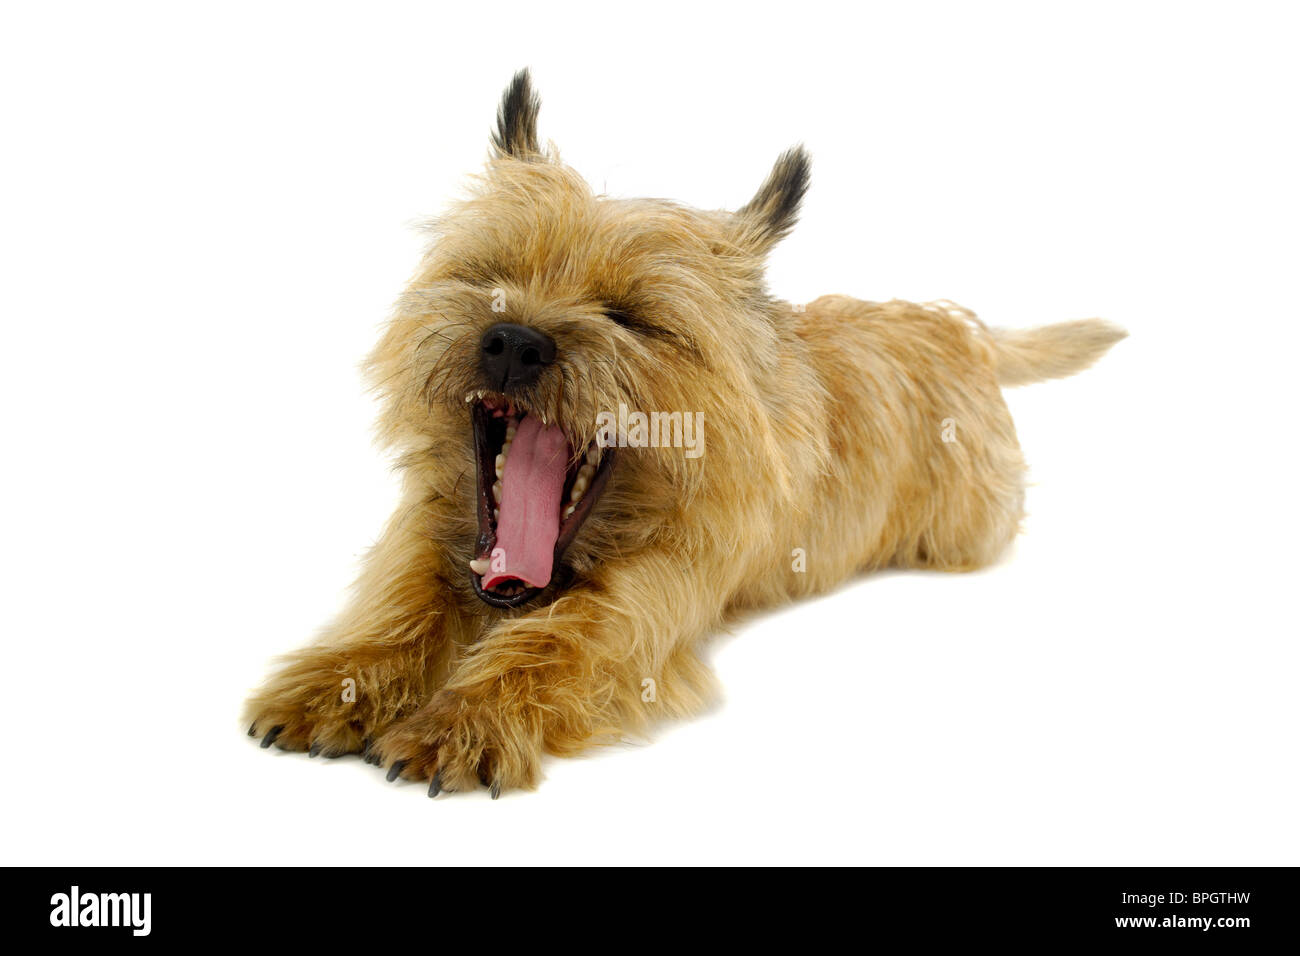 Sweet puppy dog is resting on a white background. The breed of the dog is a Cairn Terrier. Stock Photo